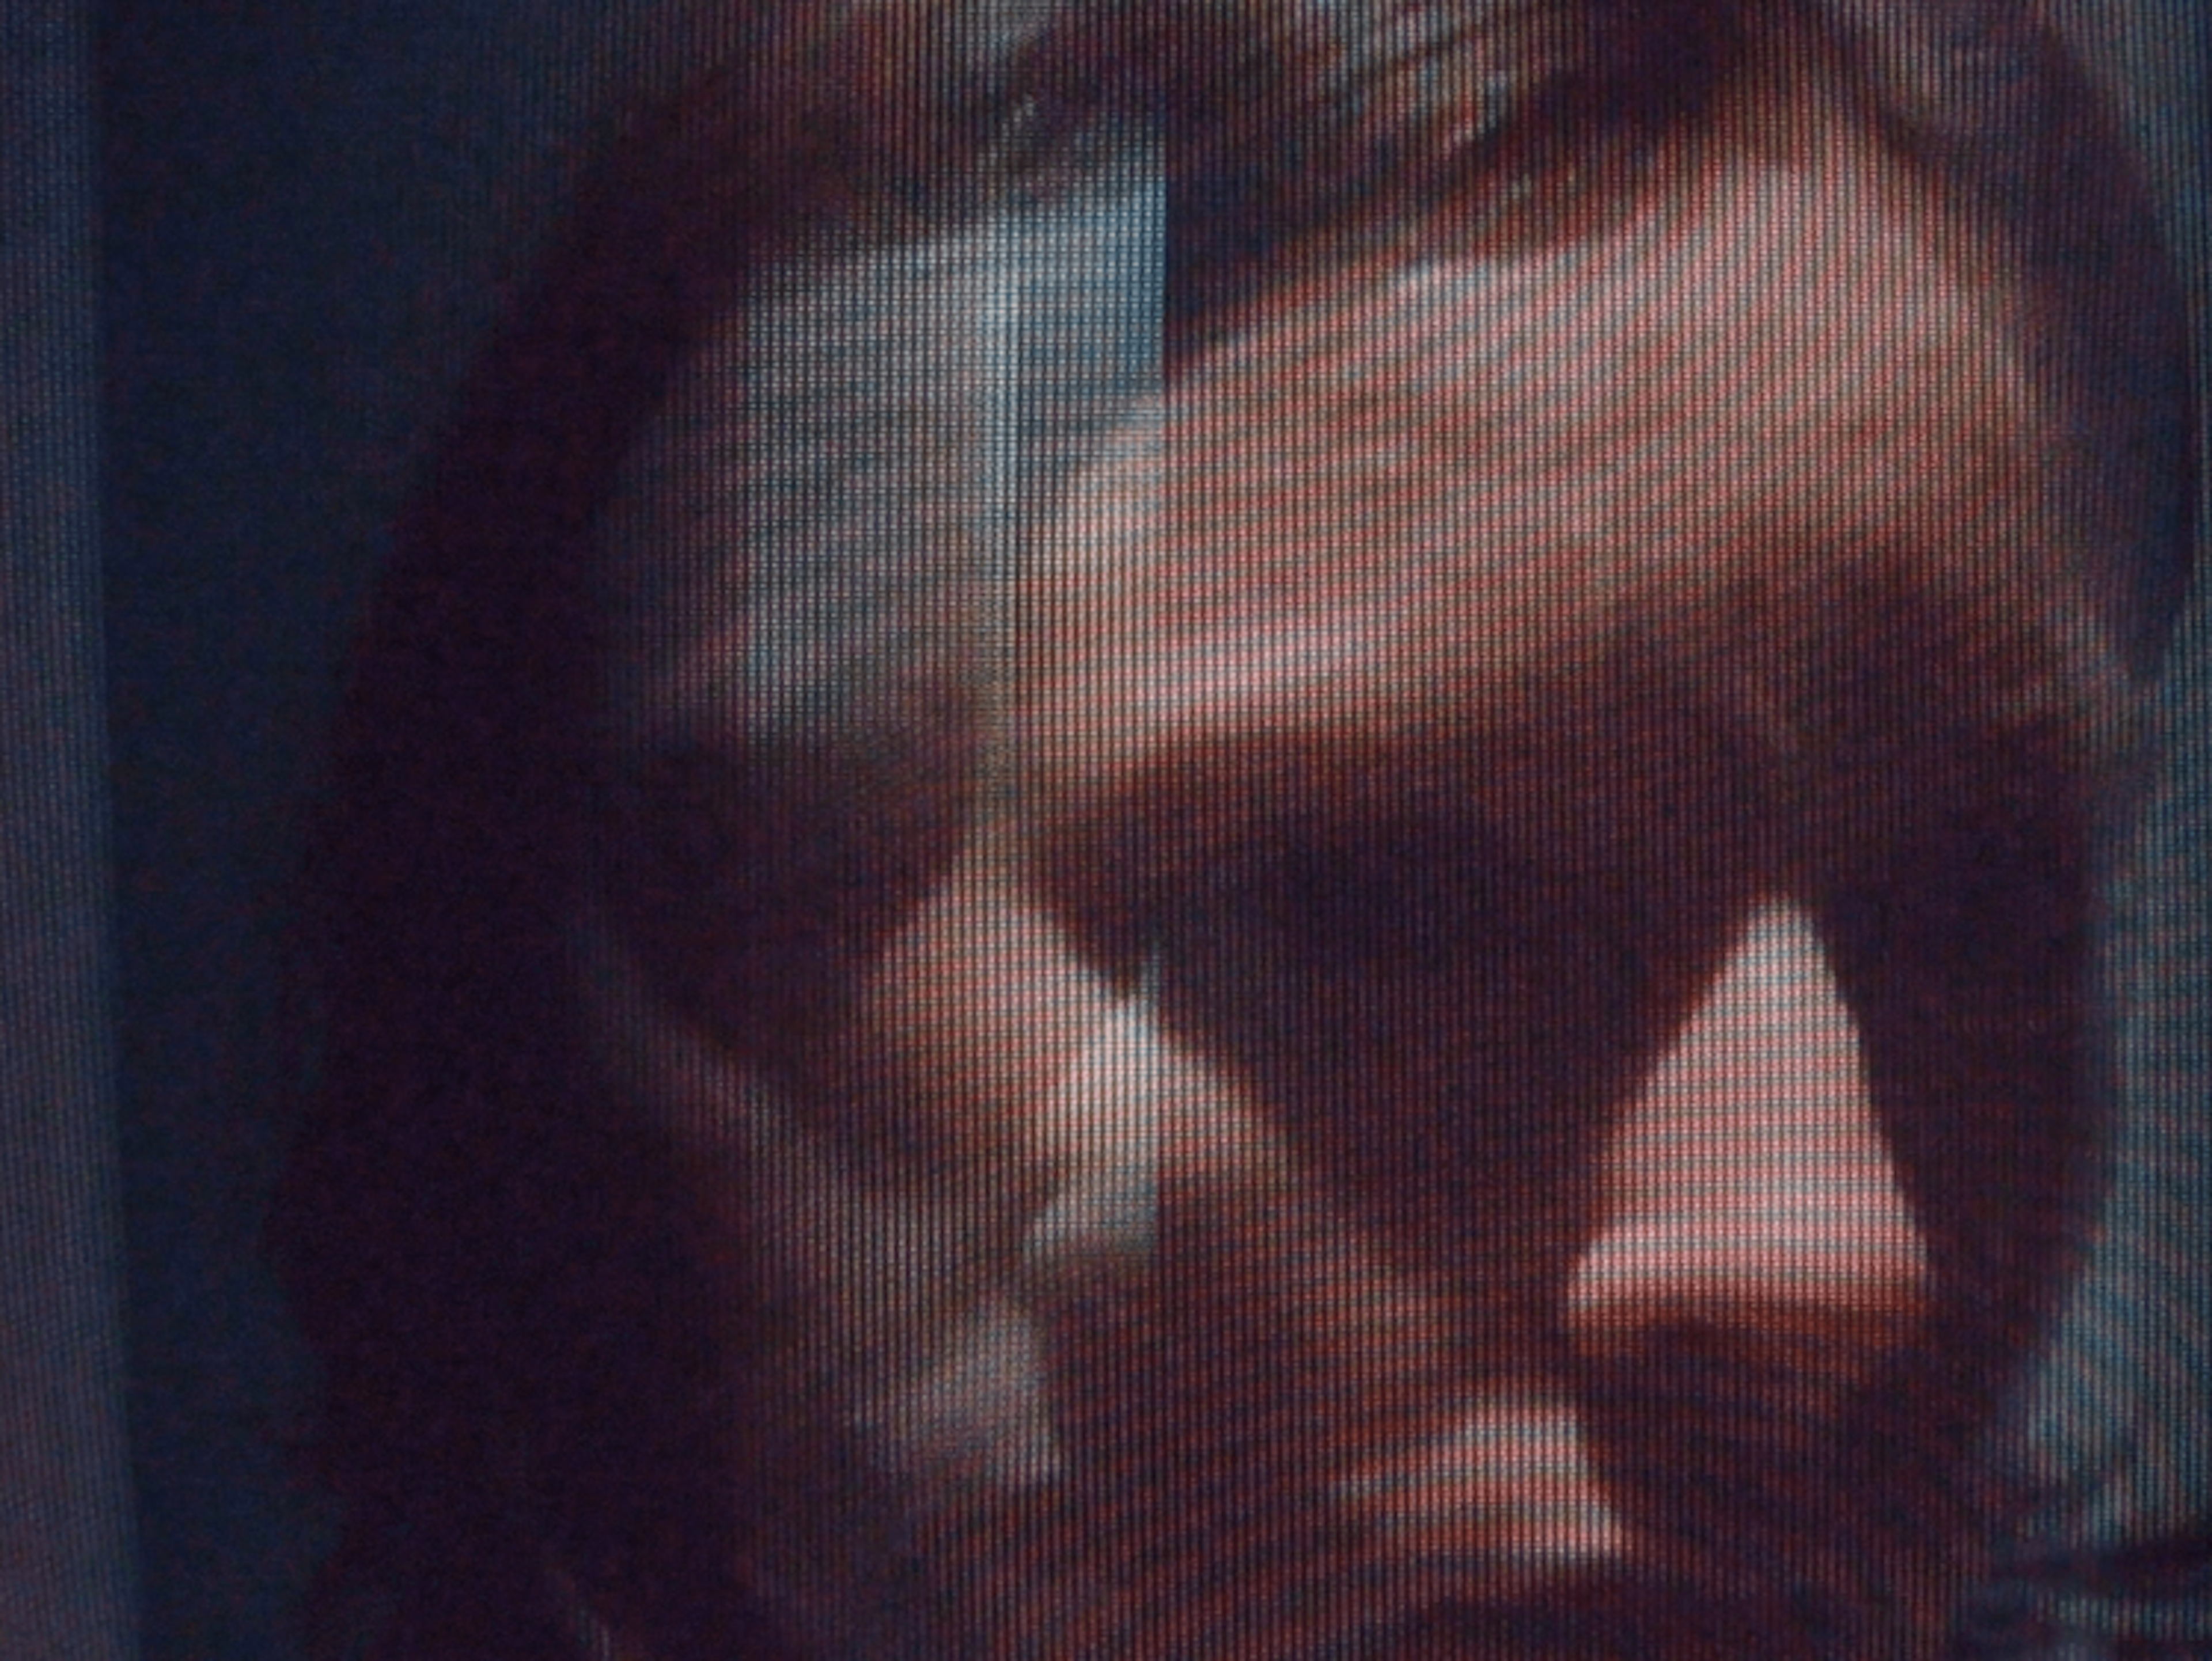 Film still showing a glitchy image of a person's face with harsh light and shadows on their face, on a dark background